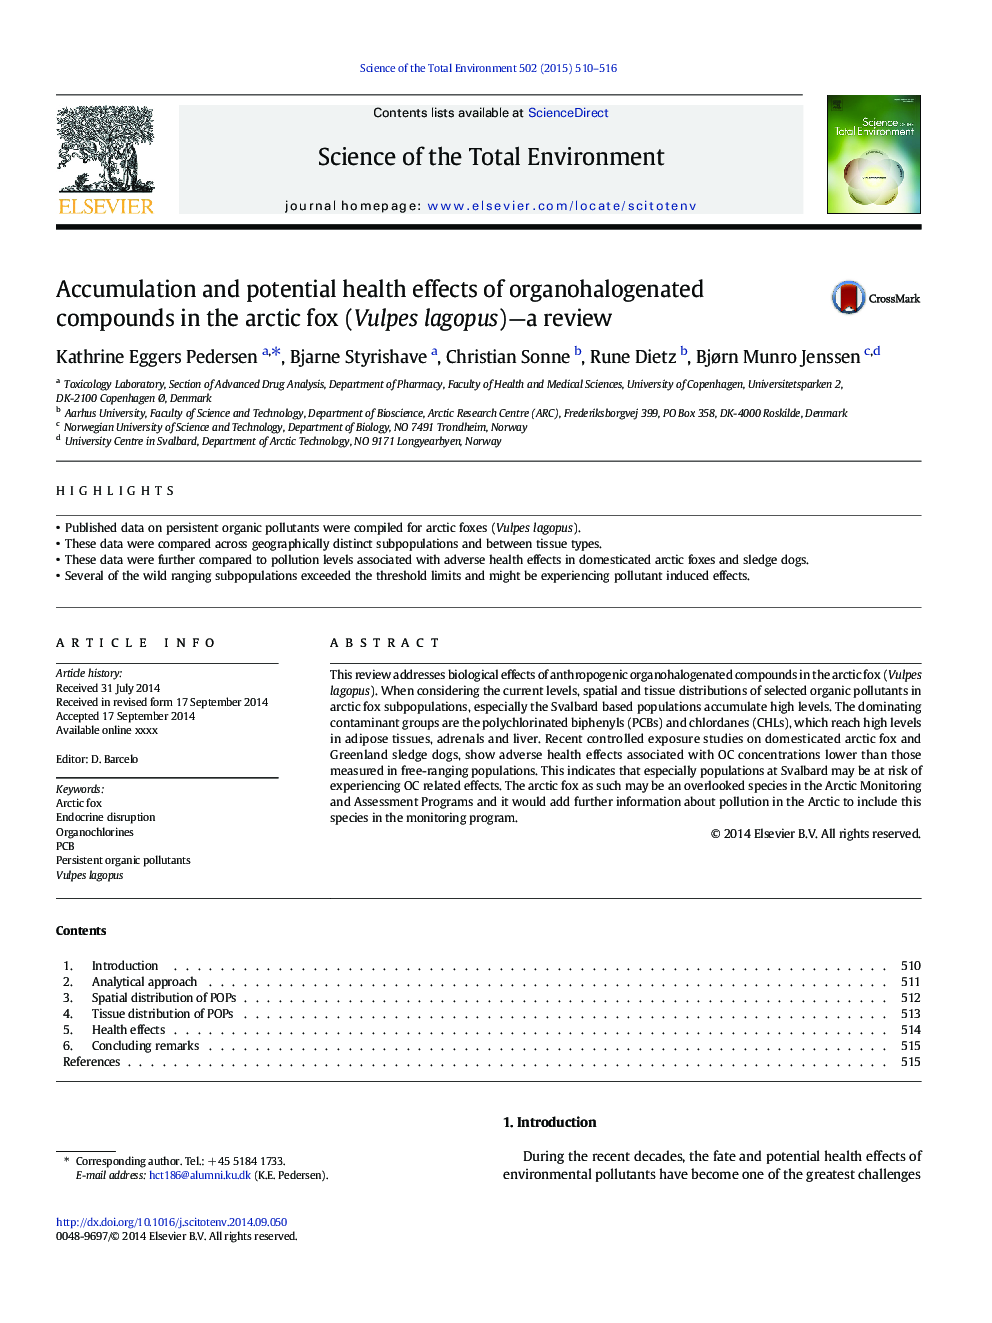 Accumulation and potential health effects of organohalogenated compounds in the arctic fox (Vulpes lagopus)-a review